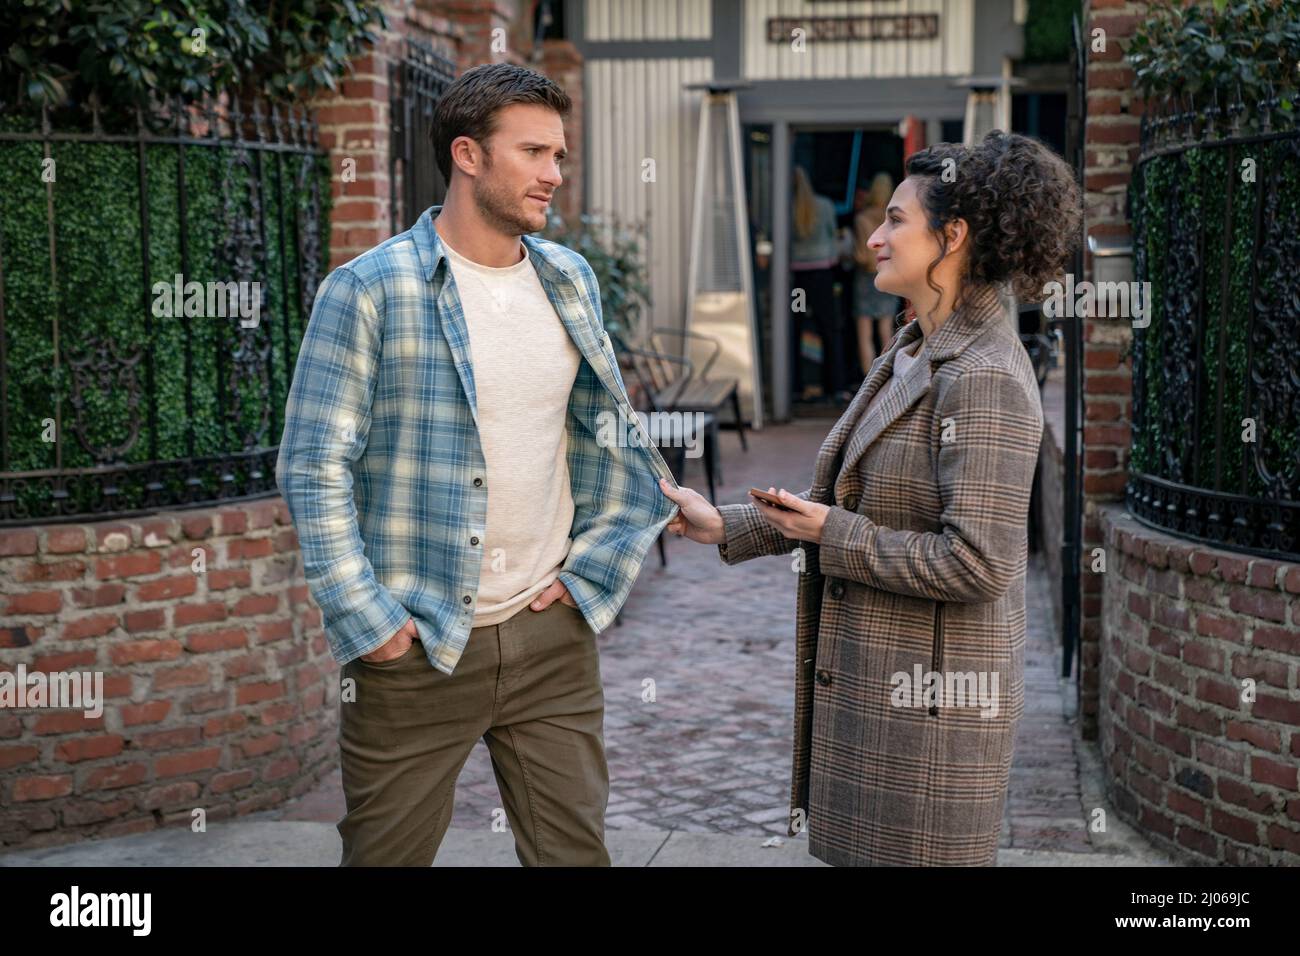 RELEASE DATE: February 11, 2022 TITLE: I Want You Back. STUDIO: Amazon Studios. DIRECTOR: Jason Orley. PLOT: Newly dumped thirty-somethings Peter and Emma team up to sabotage their exes' new relationships and win them back for good. STARRING: SCOTT EASTWOOD as Noah, JENNY SLATE as Emma. (Credit Image: © Amazon Studios/Entertainment Pictures) Stock Photo